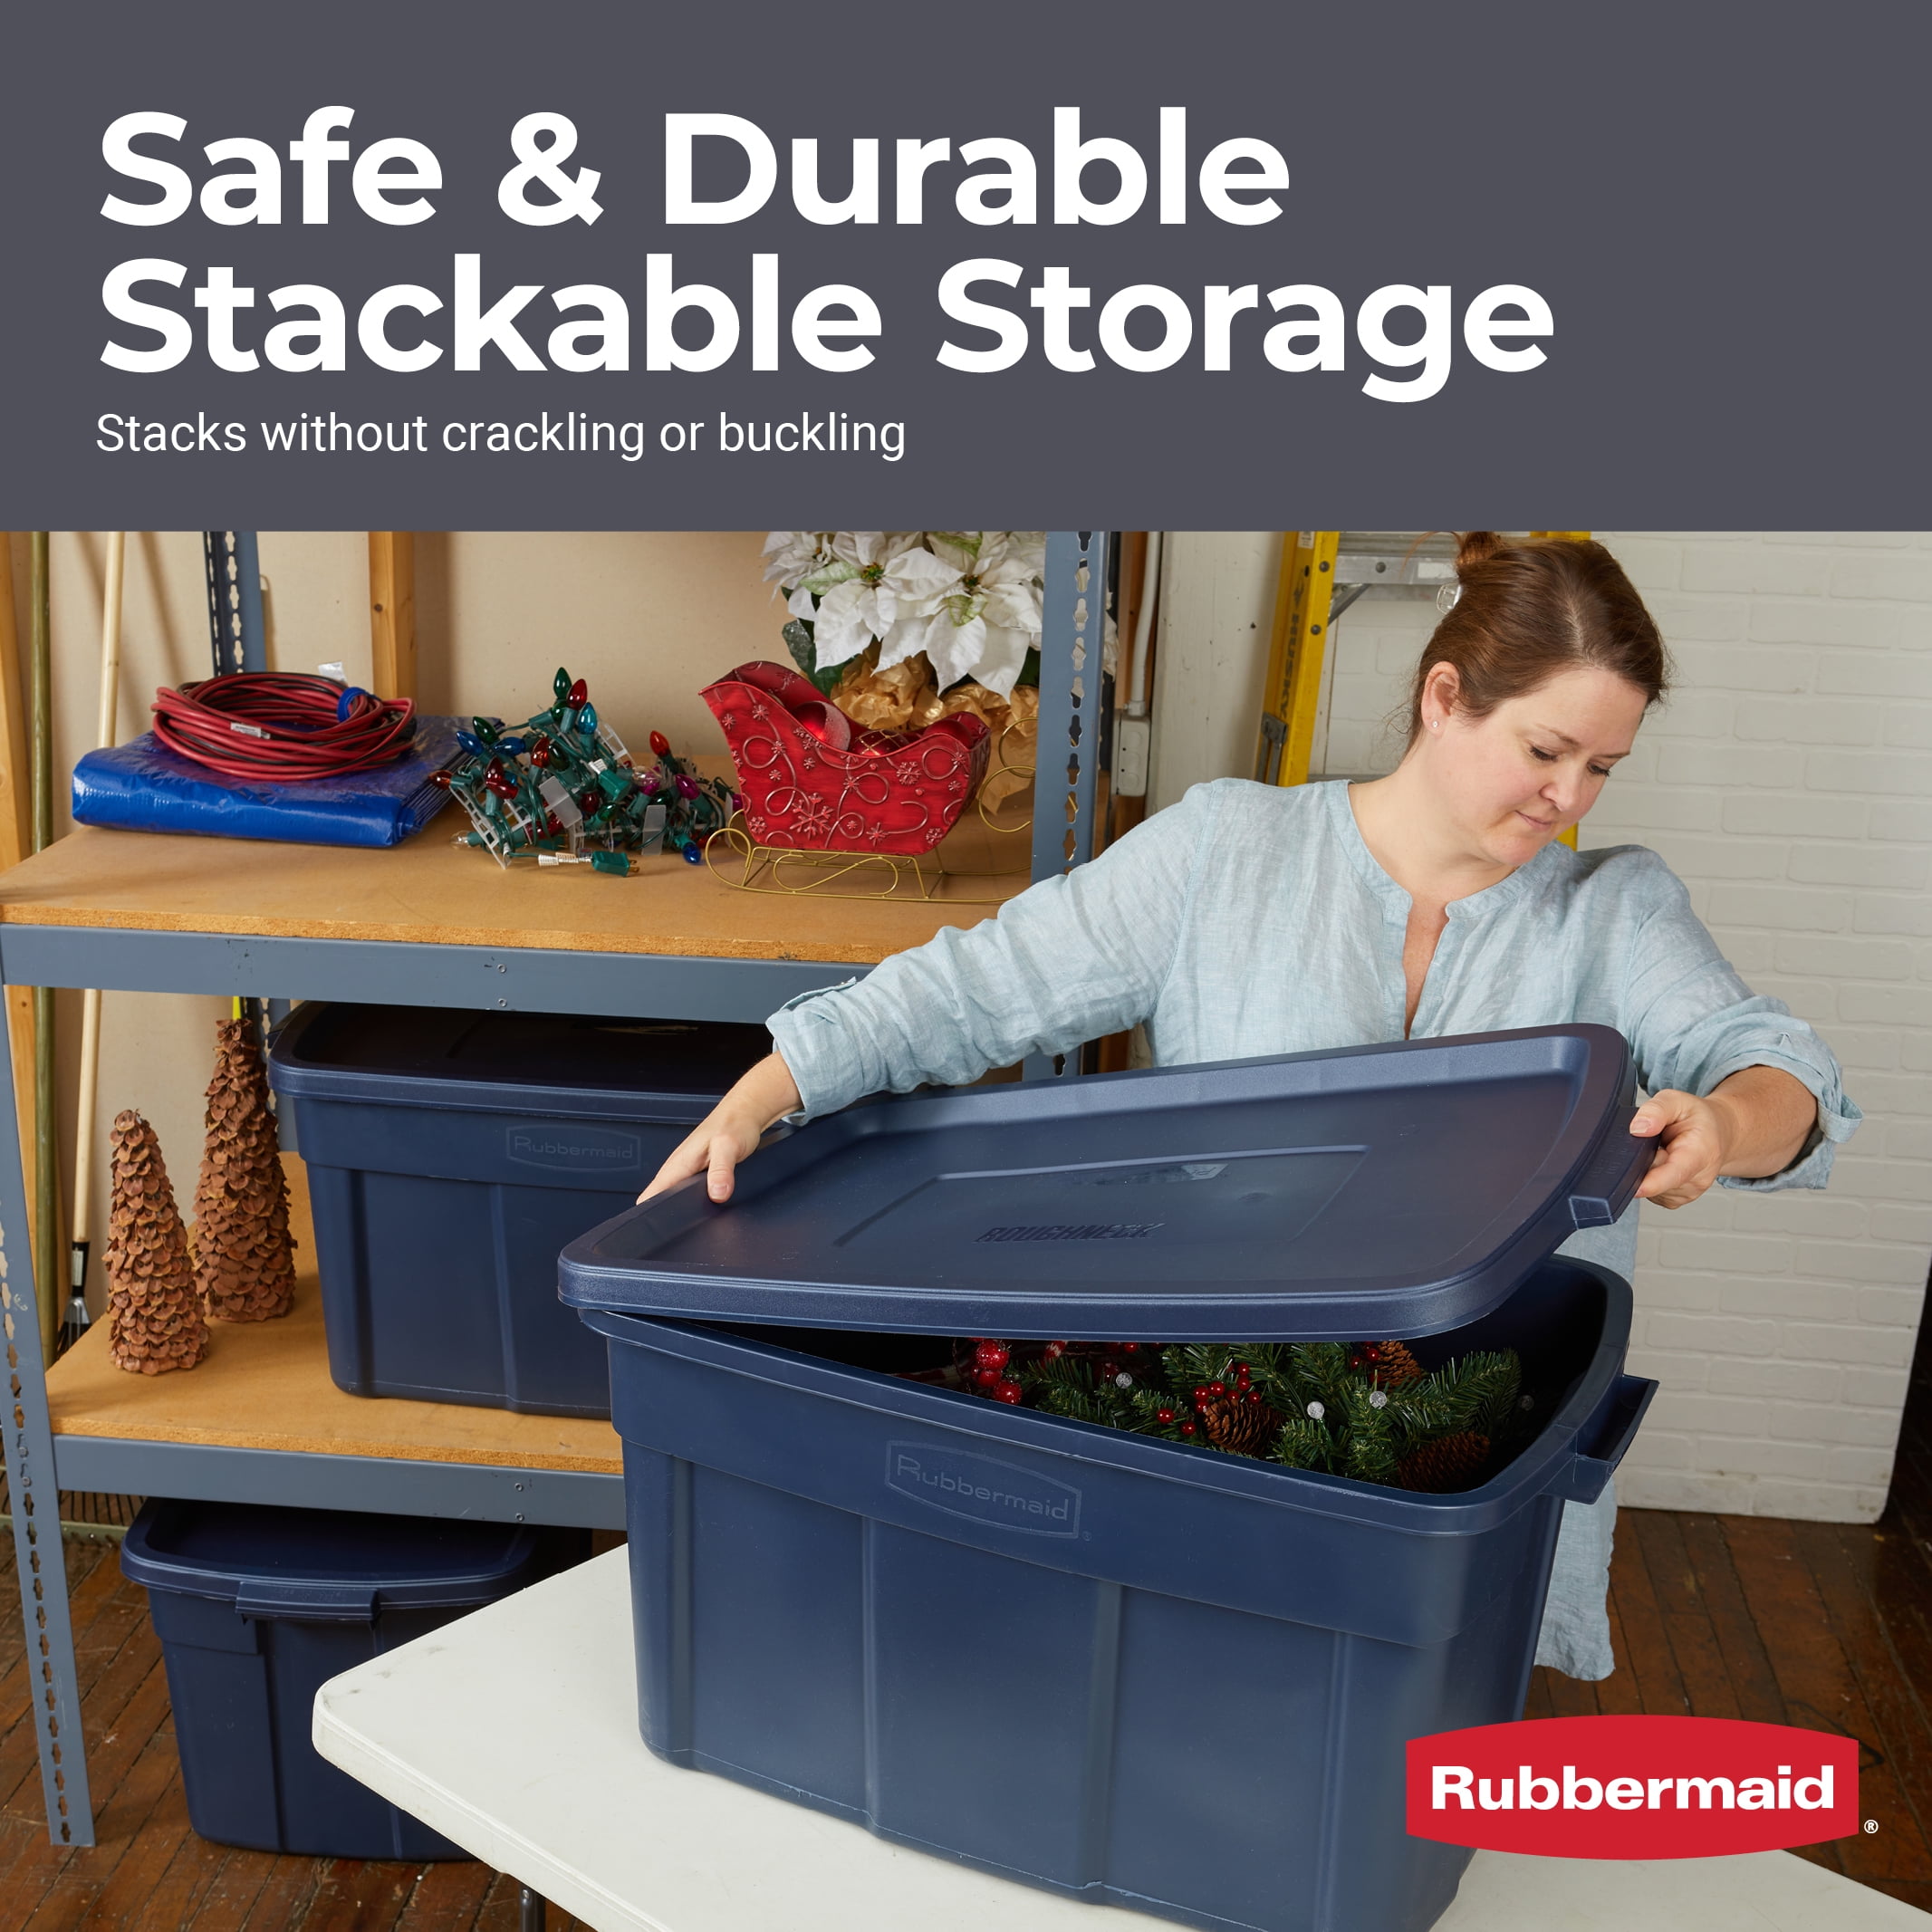 Rubbermaid Roughneck Tote 14 Gal Storage Container, Heritage Blue (6 Pack)